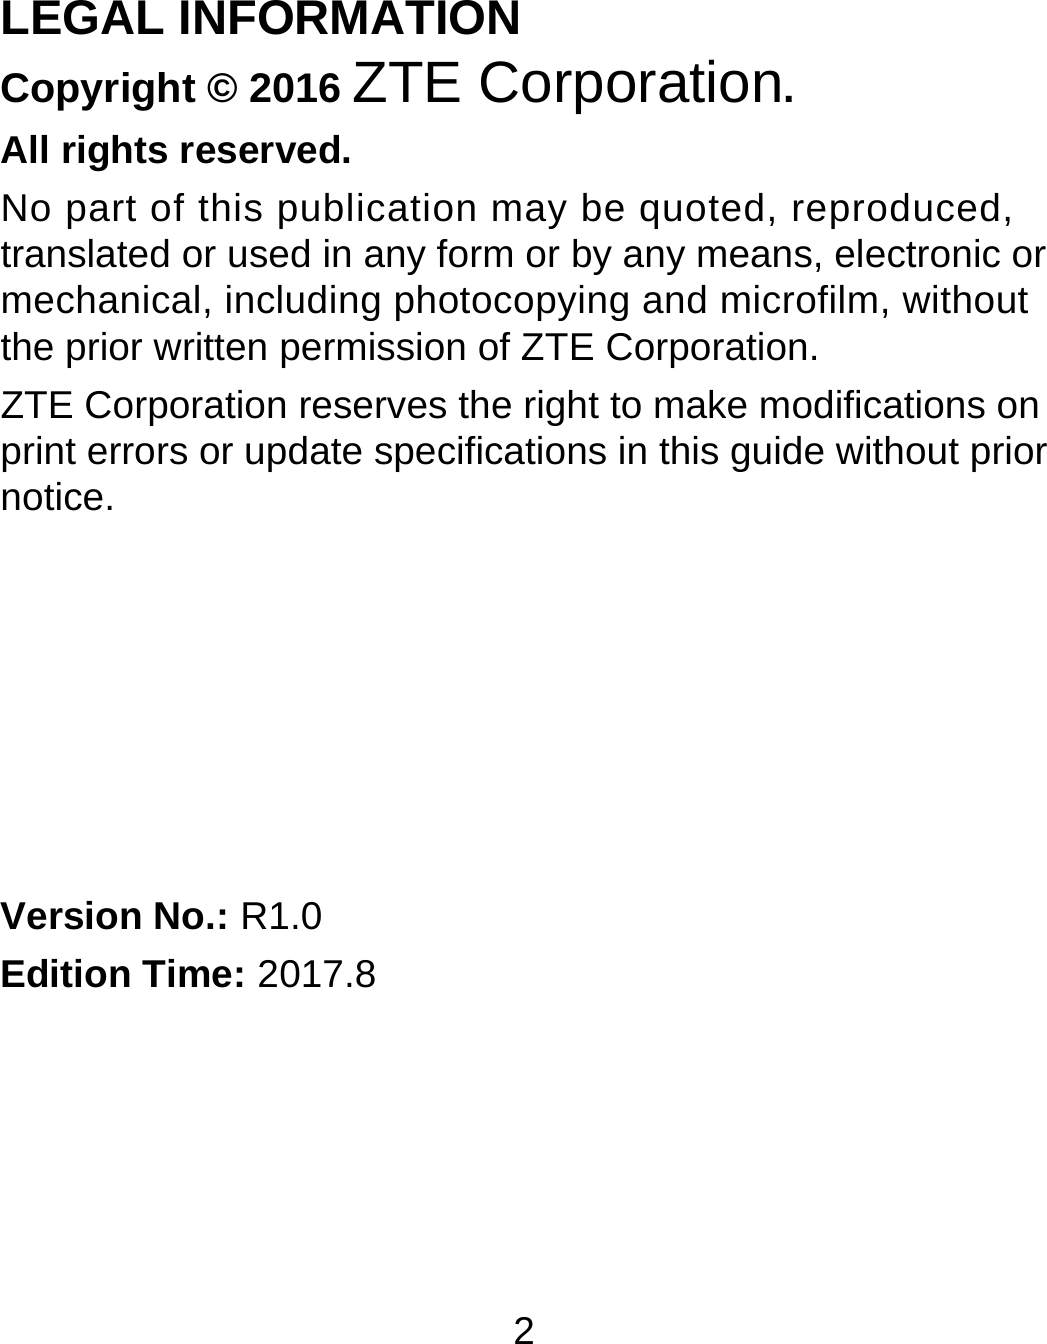 2 LEGAL INFORMATION Copyright © 2016 ZTE Corporation. All rights reserved. No part of this publication may be quoted, reproduced, translated or used in any form or by any means, electronic or mechanical, including photocopying and microfilm, without the prior written permission of ZTE Corporation. ZTE Corporation reserves the right to make modifications on print errors or update specifications in this guide without prior notice.       Version No.: R1.0 Edition Time: 2017.8  